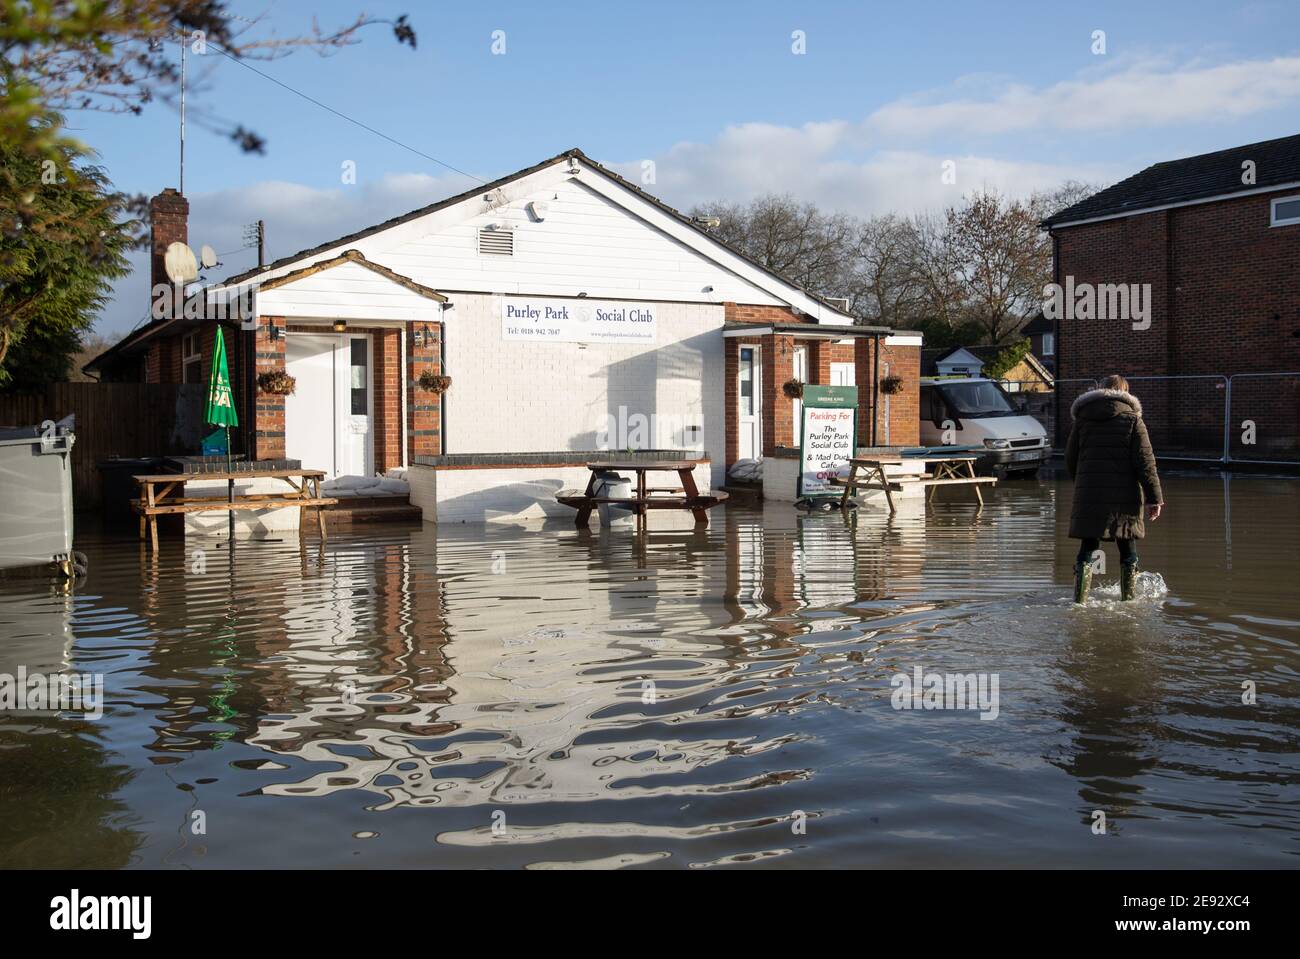 A person walks through floodwater next to the Purley Park Social Club in Purley on Thames in Berkshire. Picture date: Tuesday February 2, 2021. Stock Photo